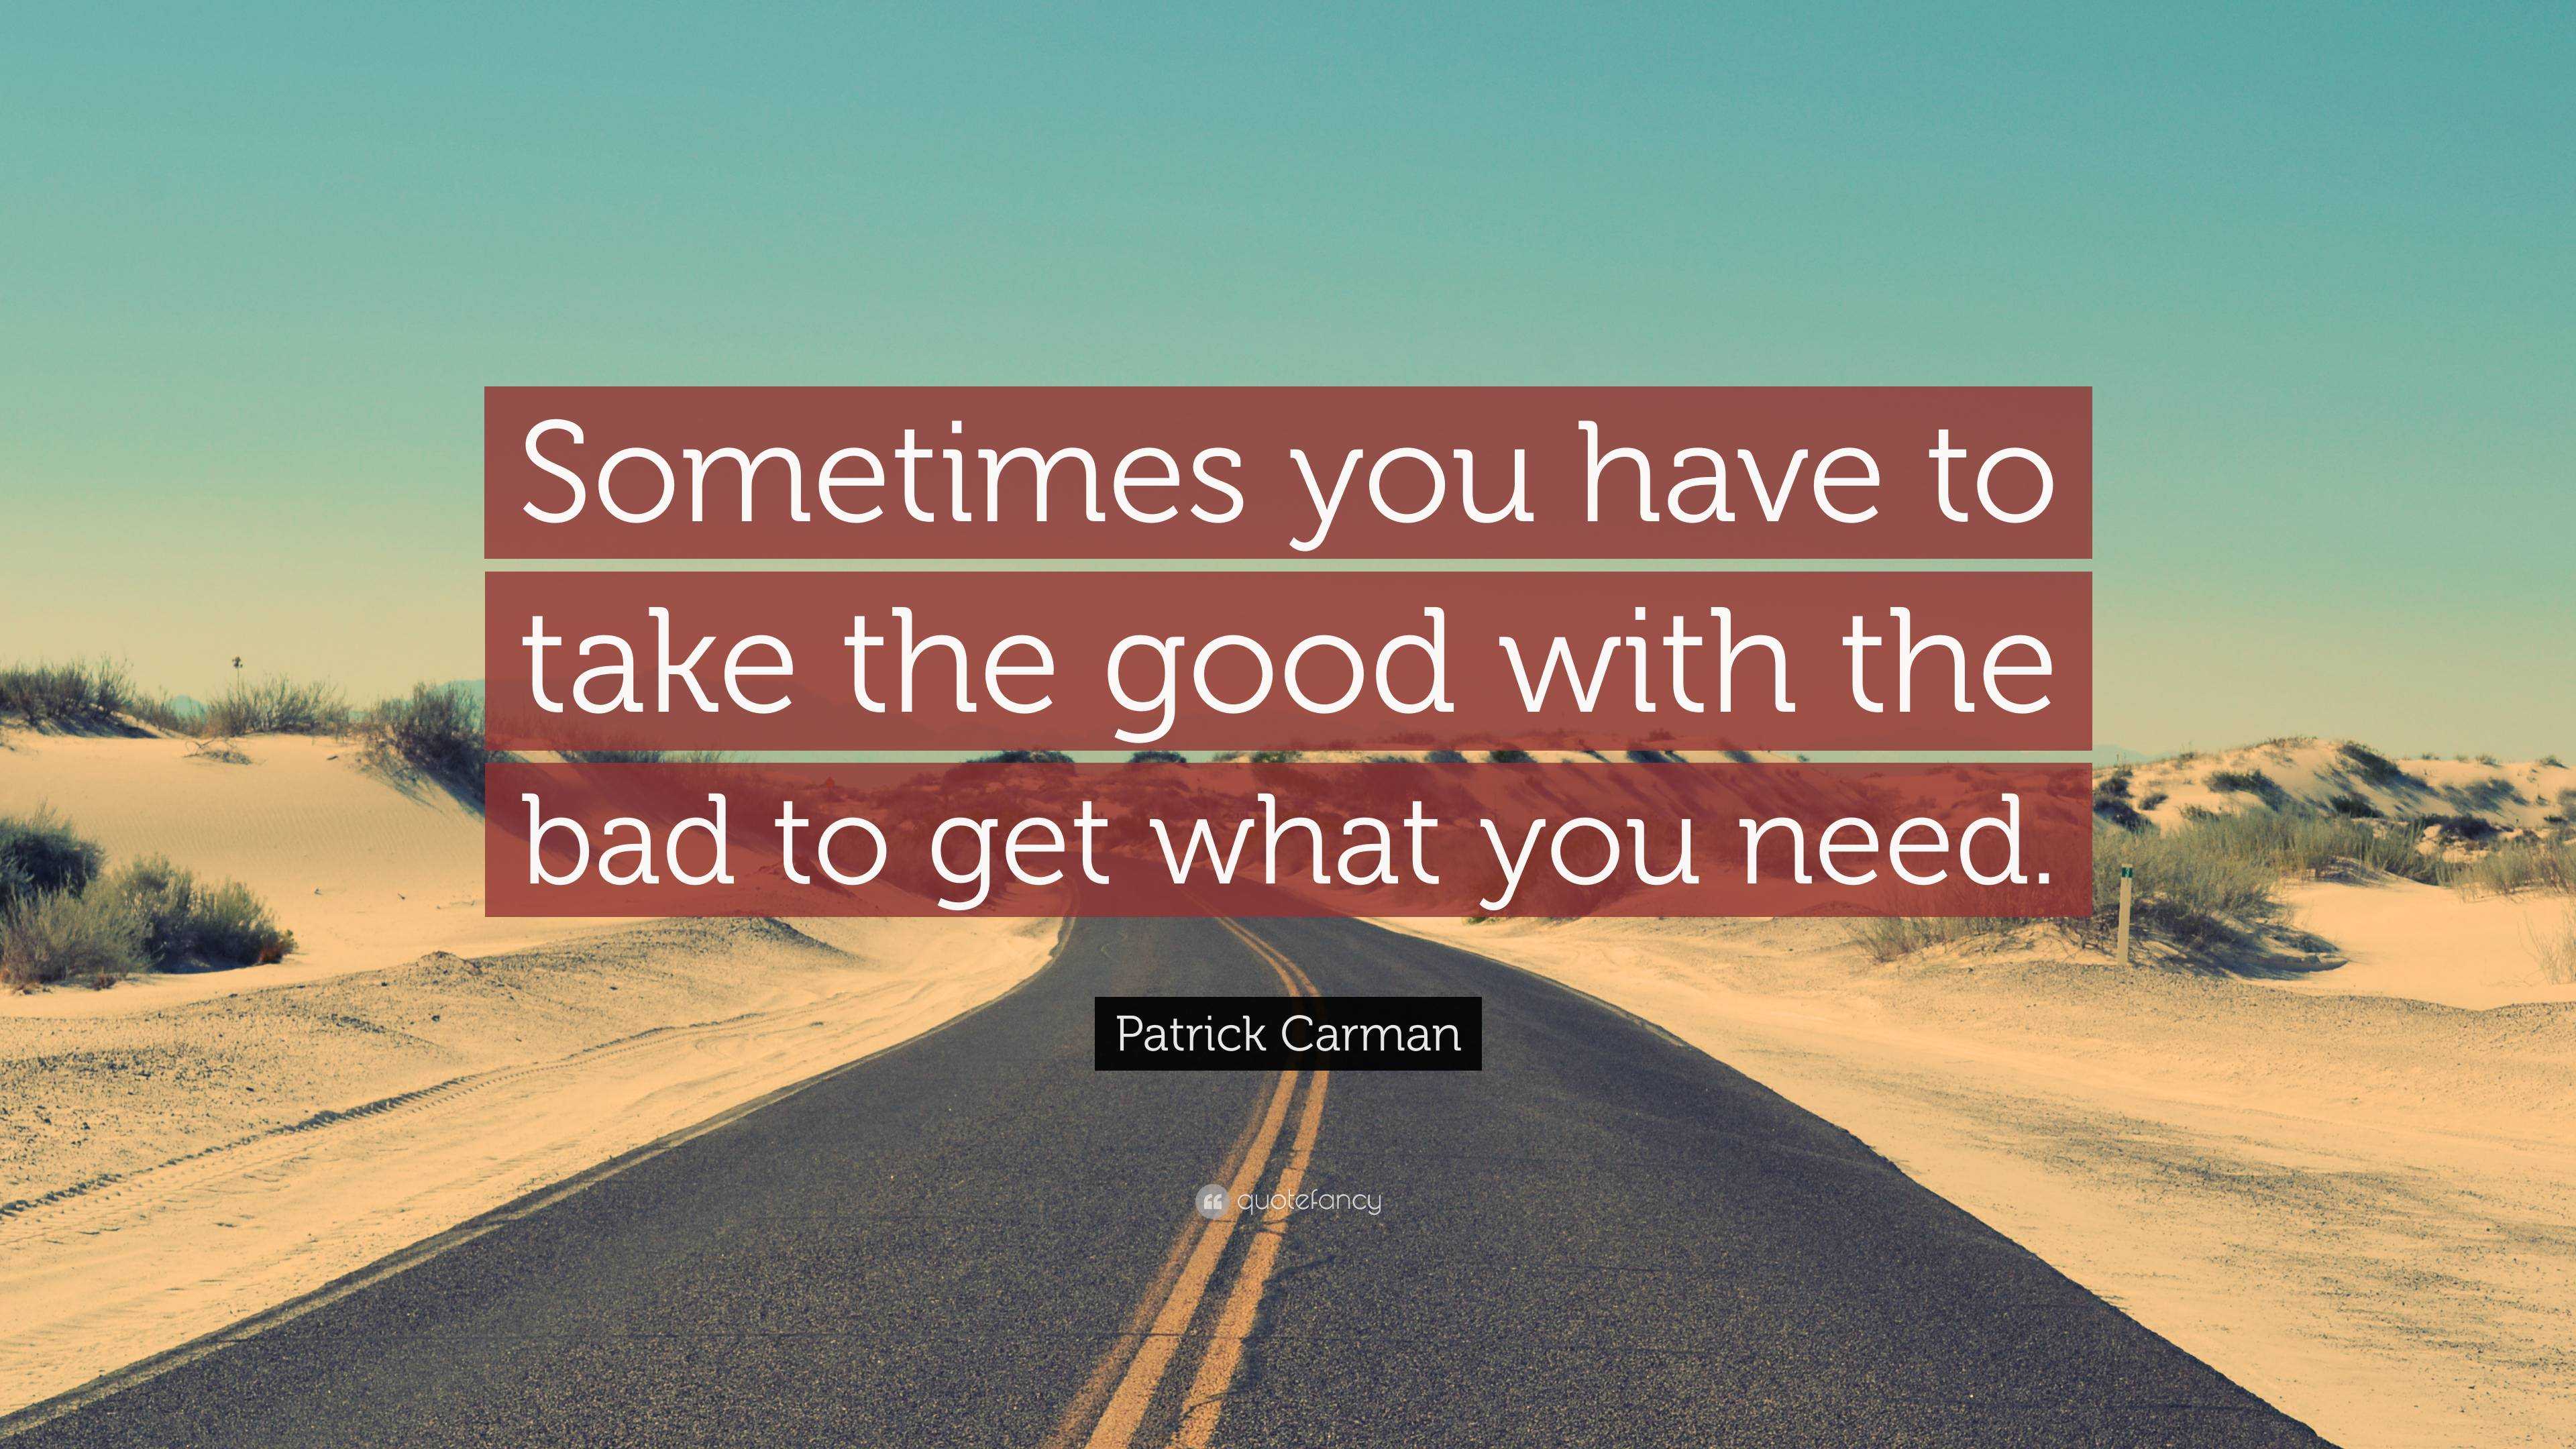 Patrick Carman Quote: “Sometimes you have to take the good with the bad ...